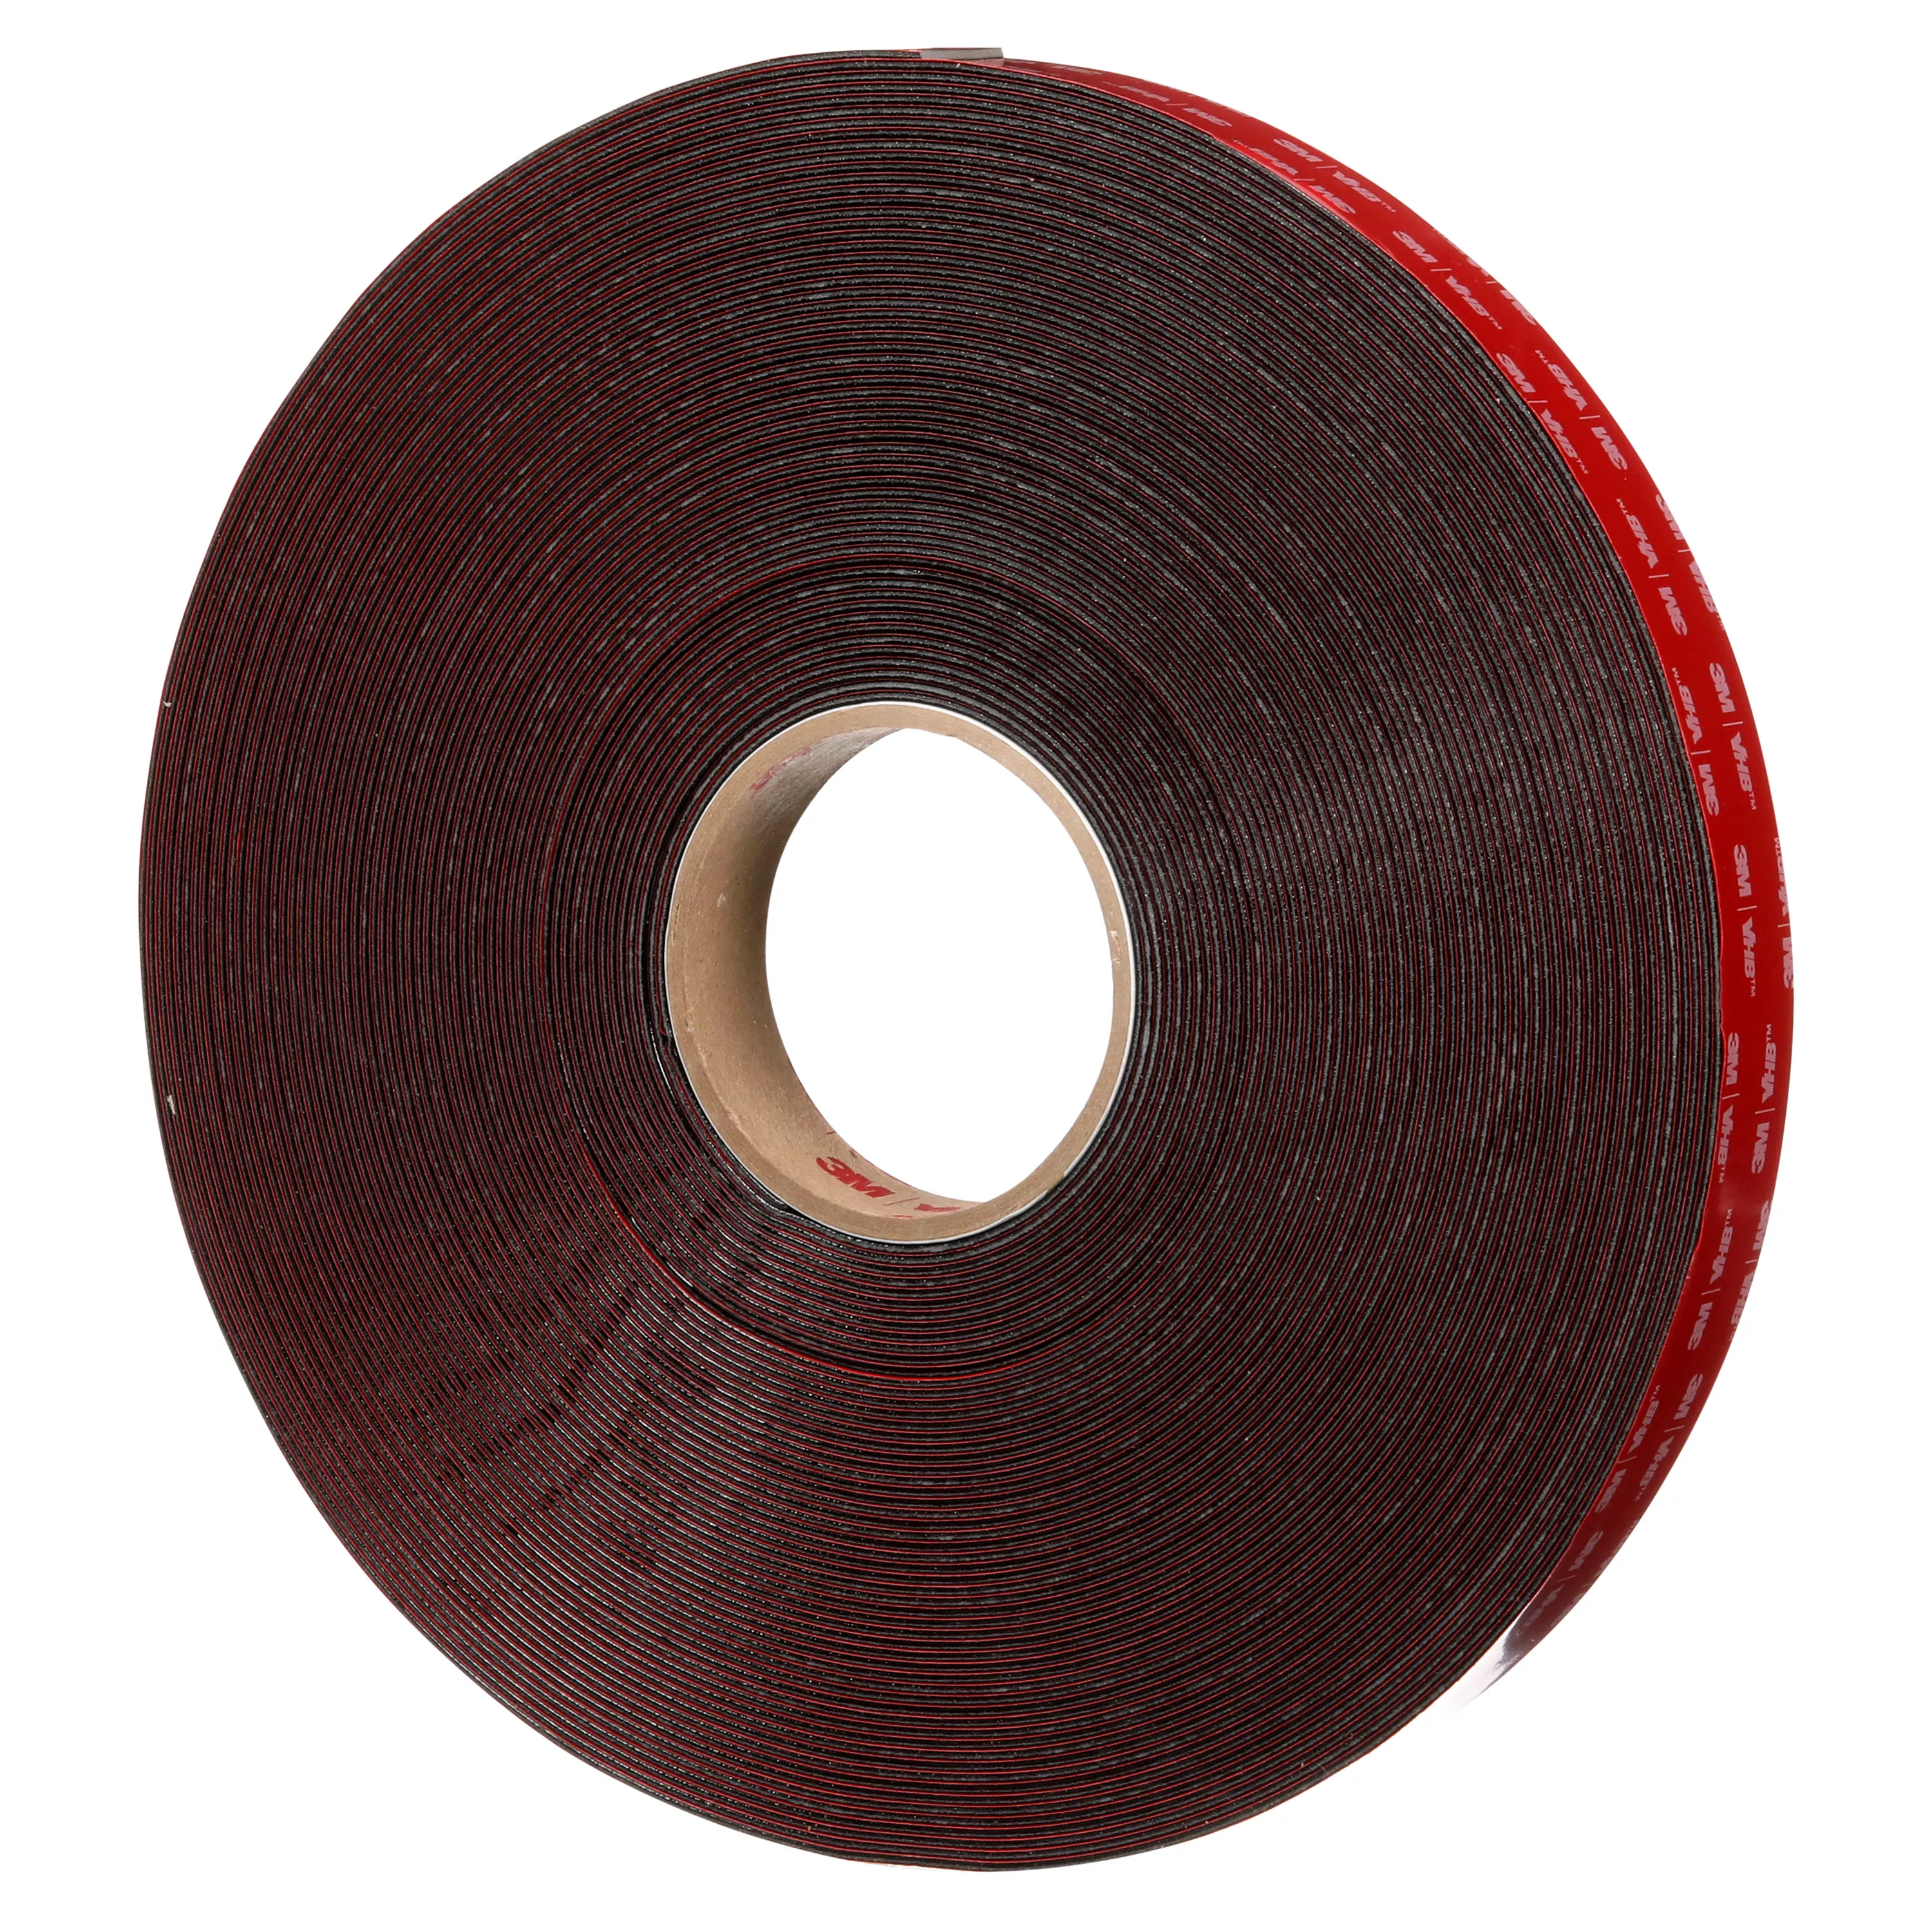 Product Number 4979 | 3M™ VHB™ Tape 4979